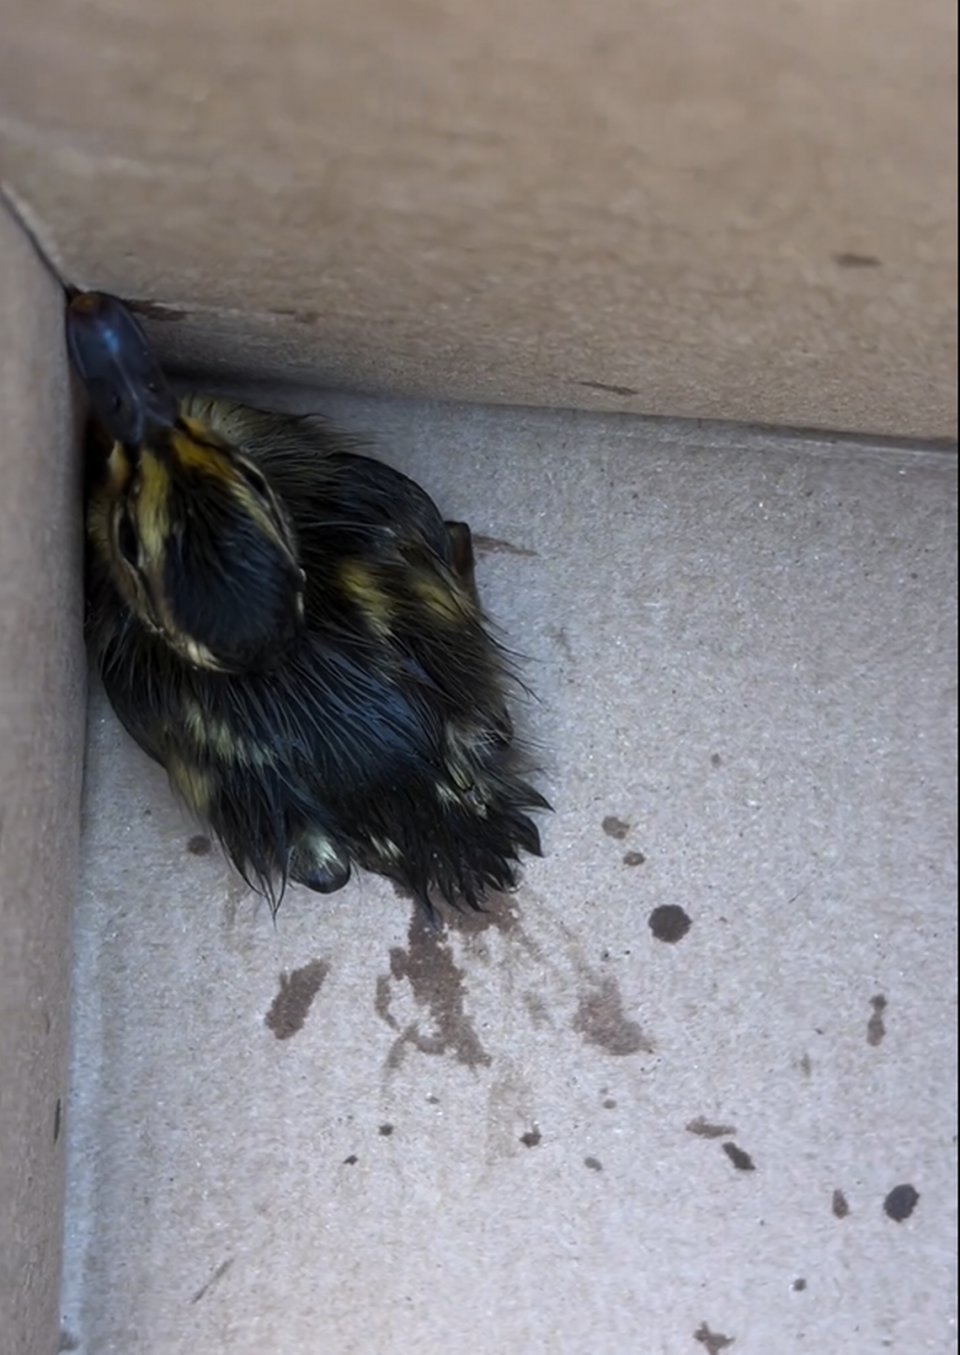 Pasco firefighters rescued a duckling after it fell down a storm drain.